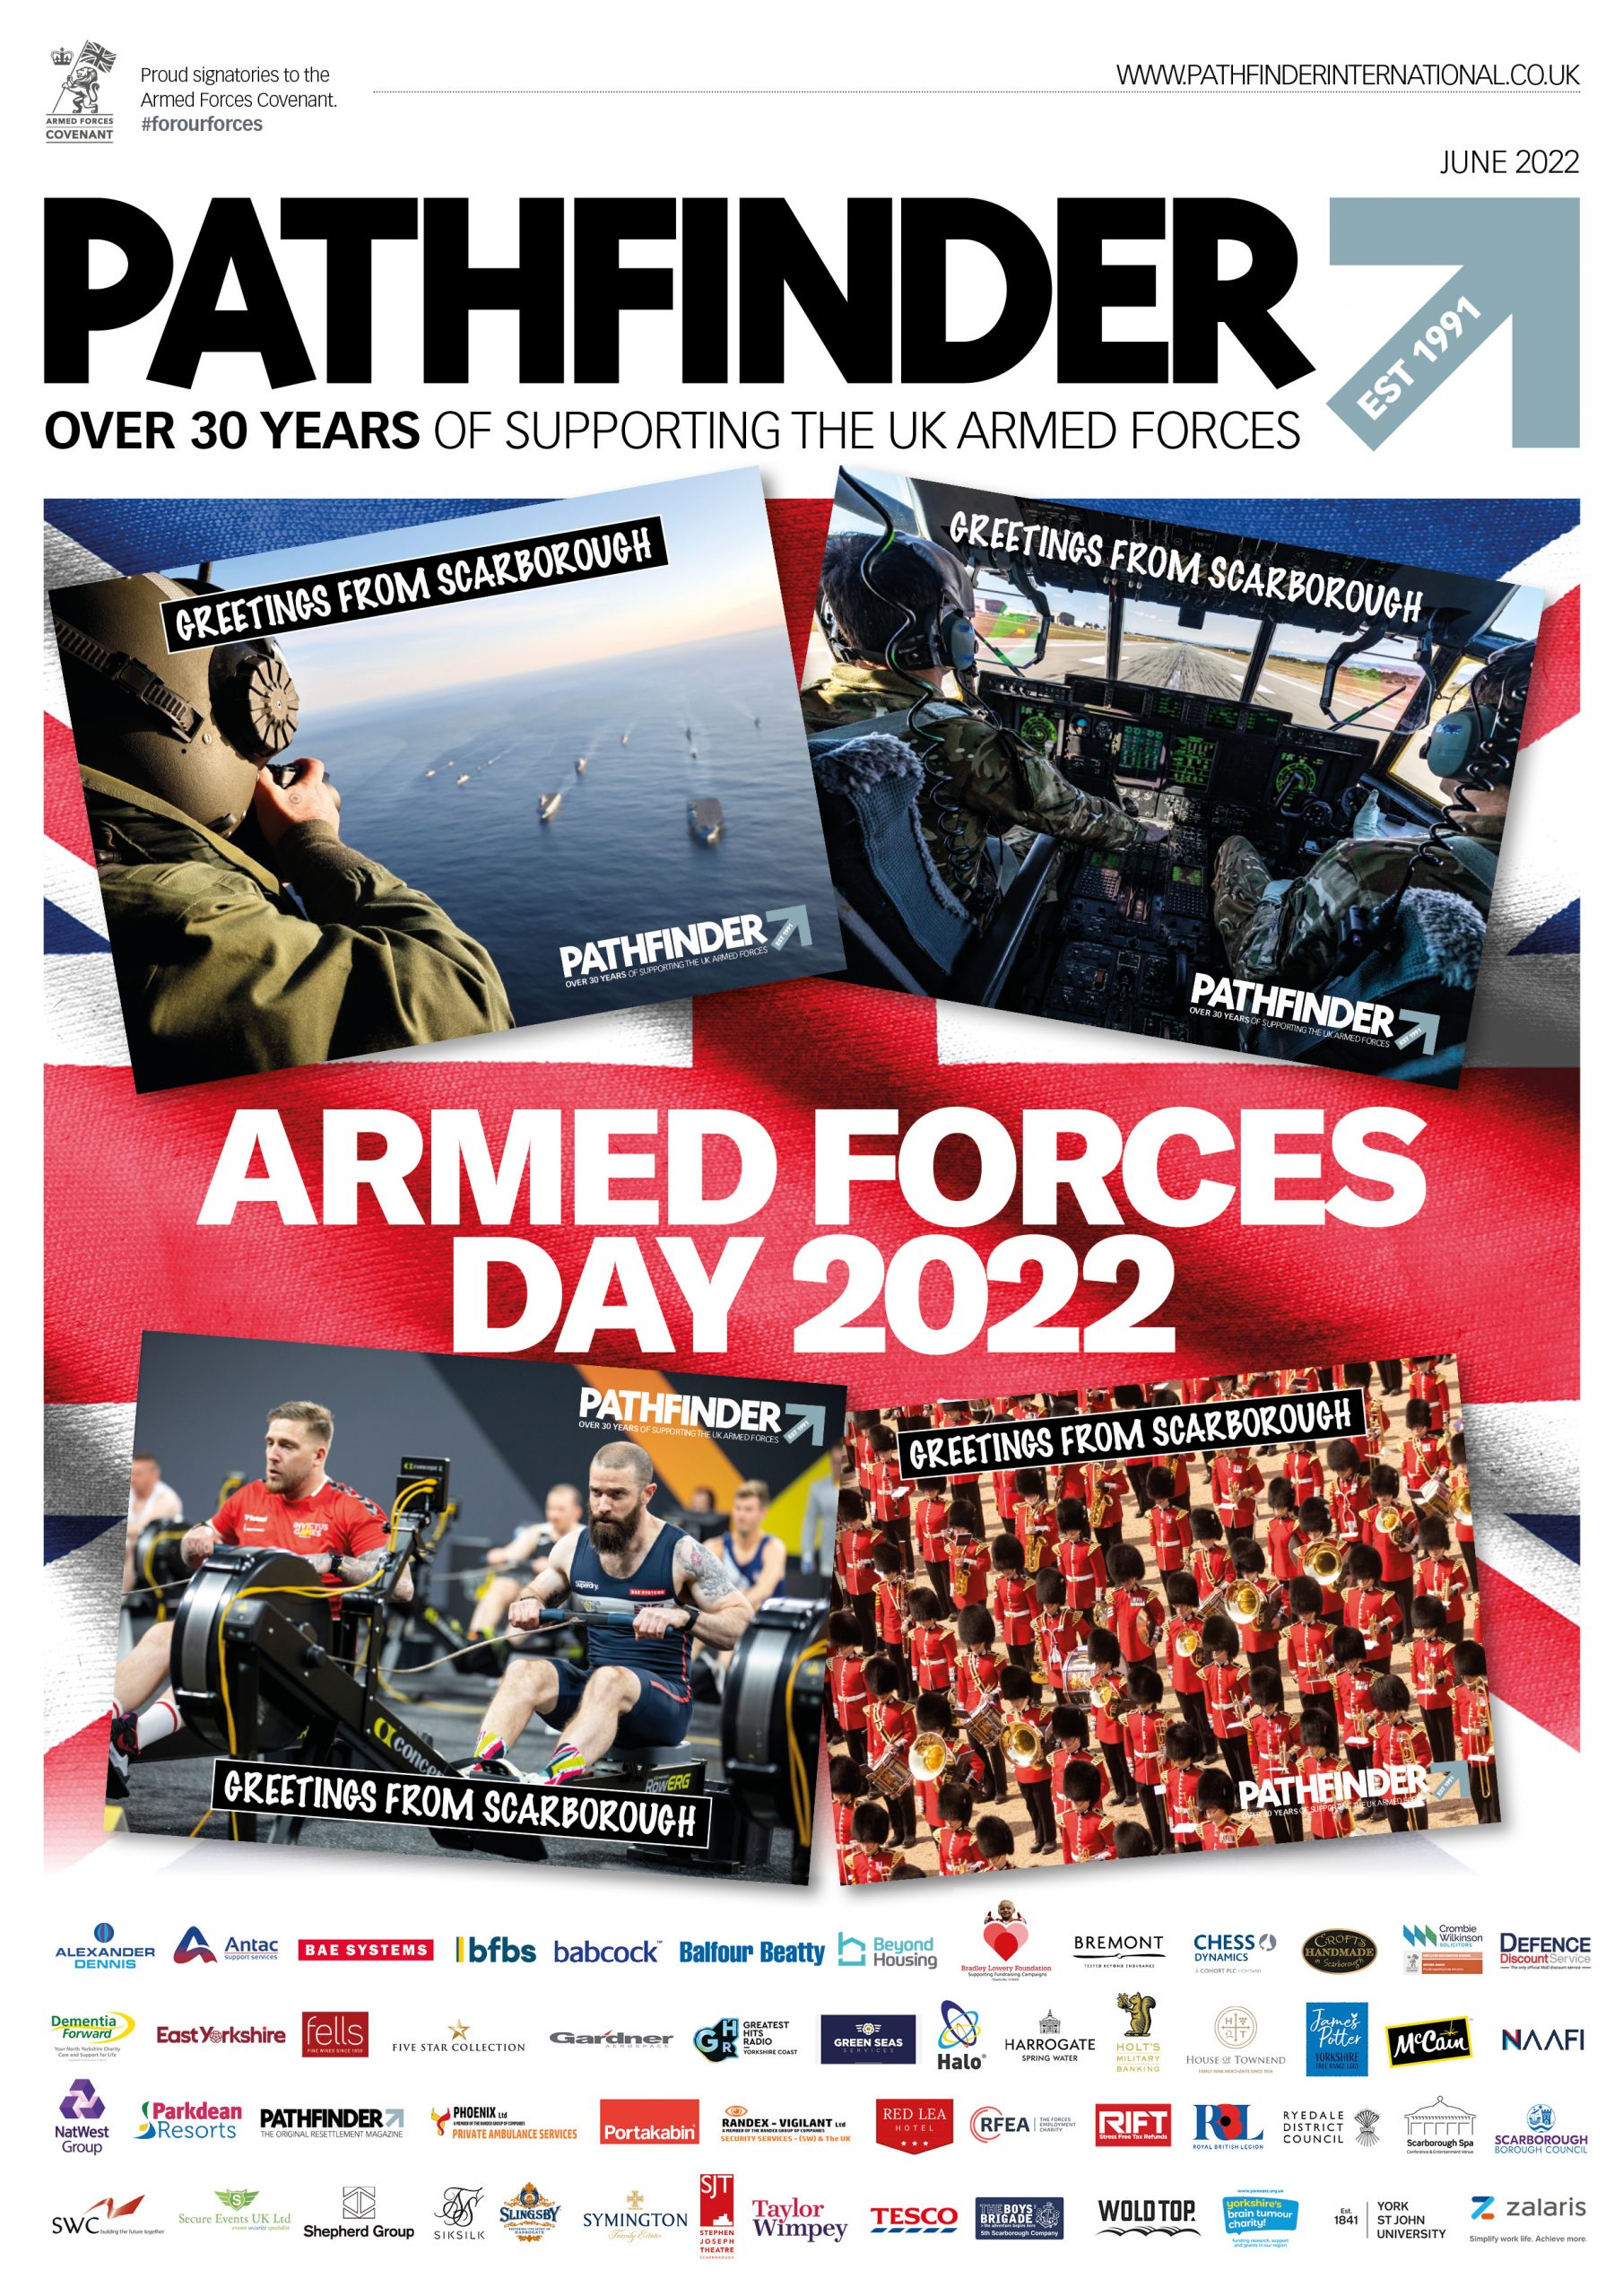 The Armed Forces Day 2022 Issue Of Pathfinder Magazine Is Out Now!